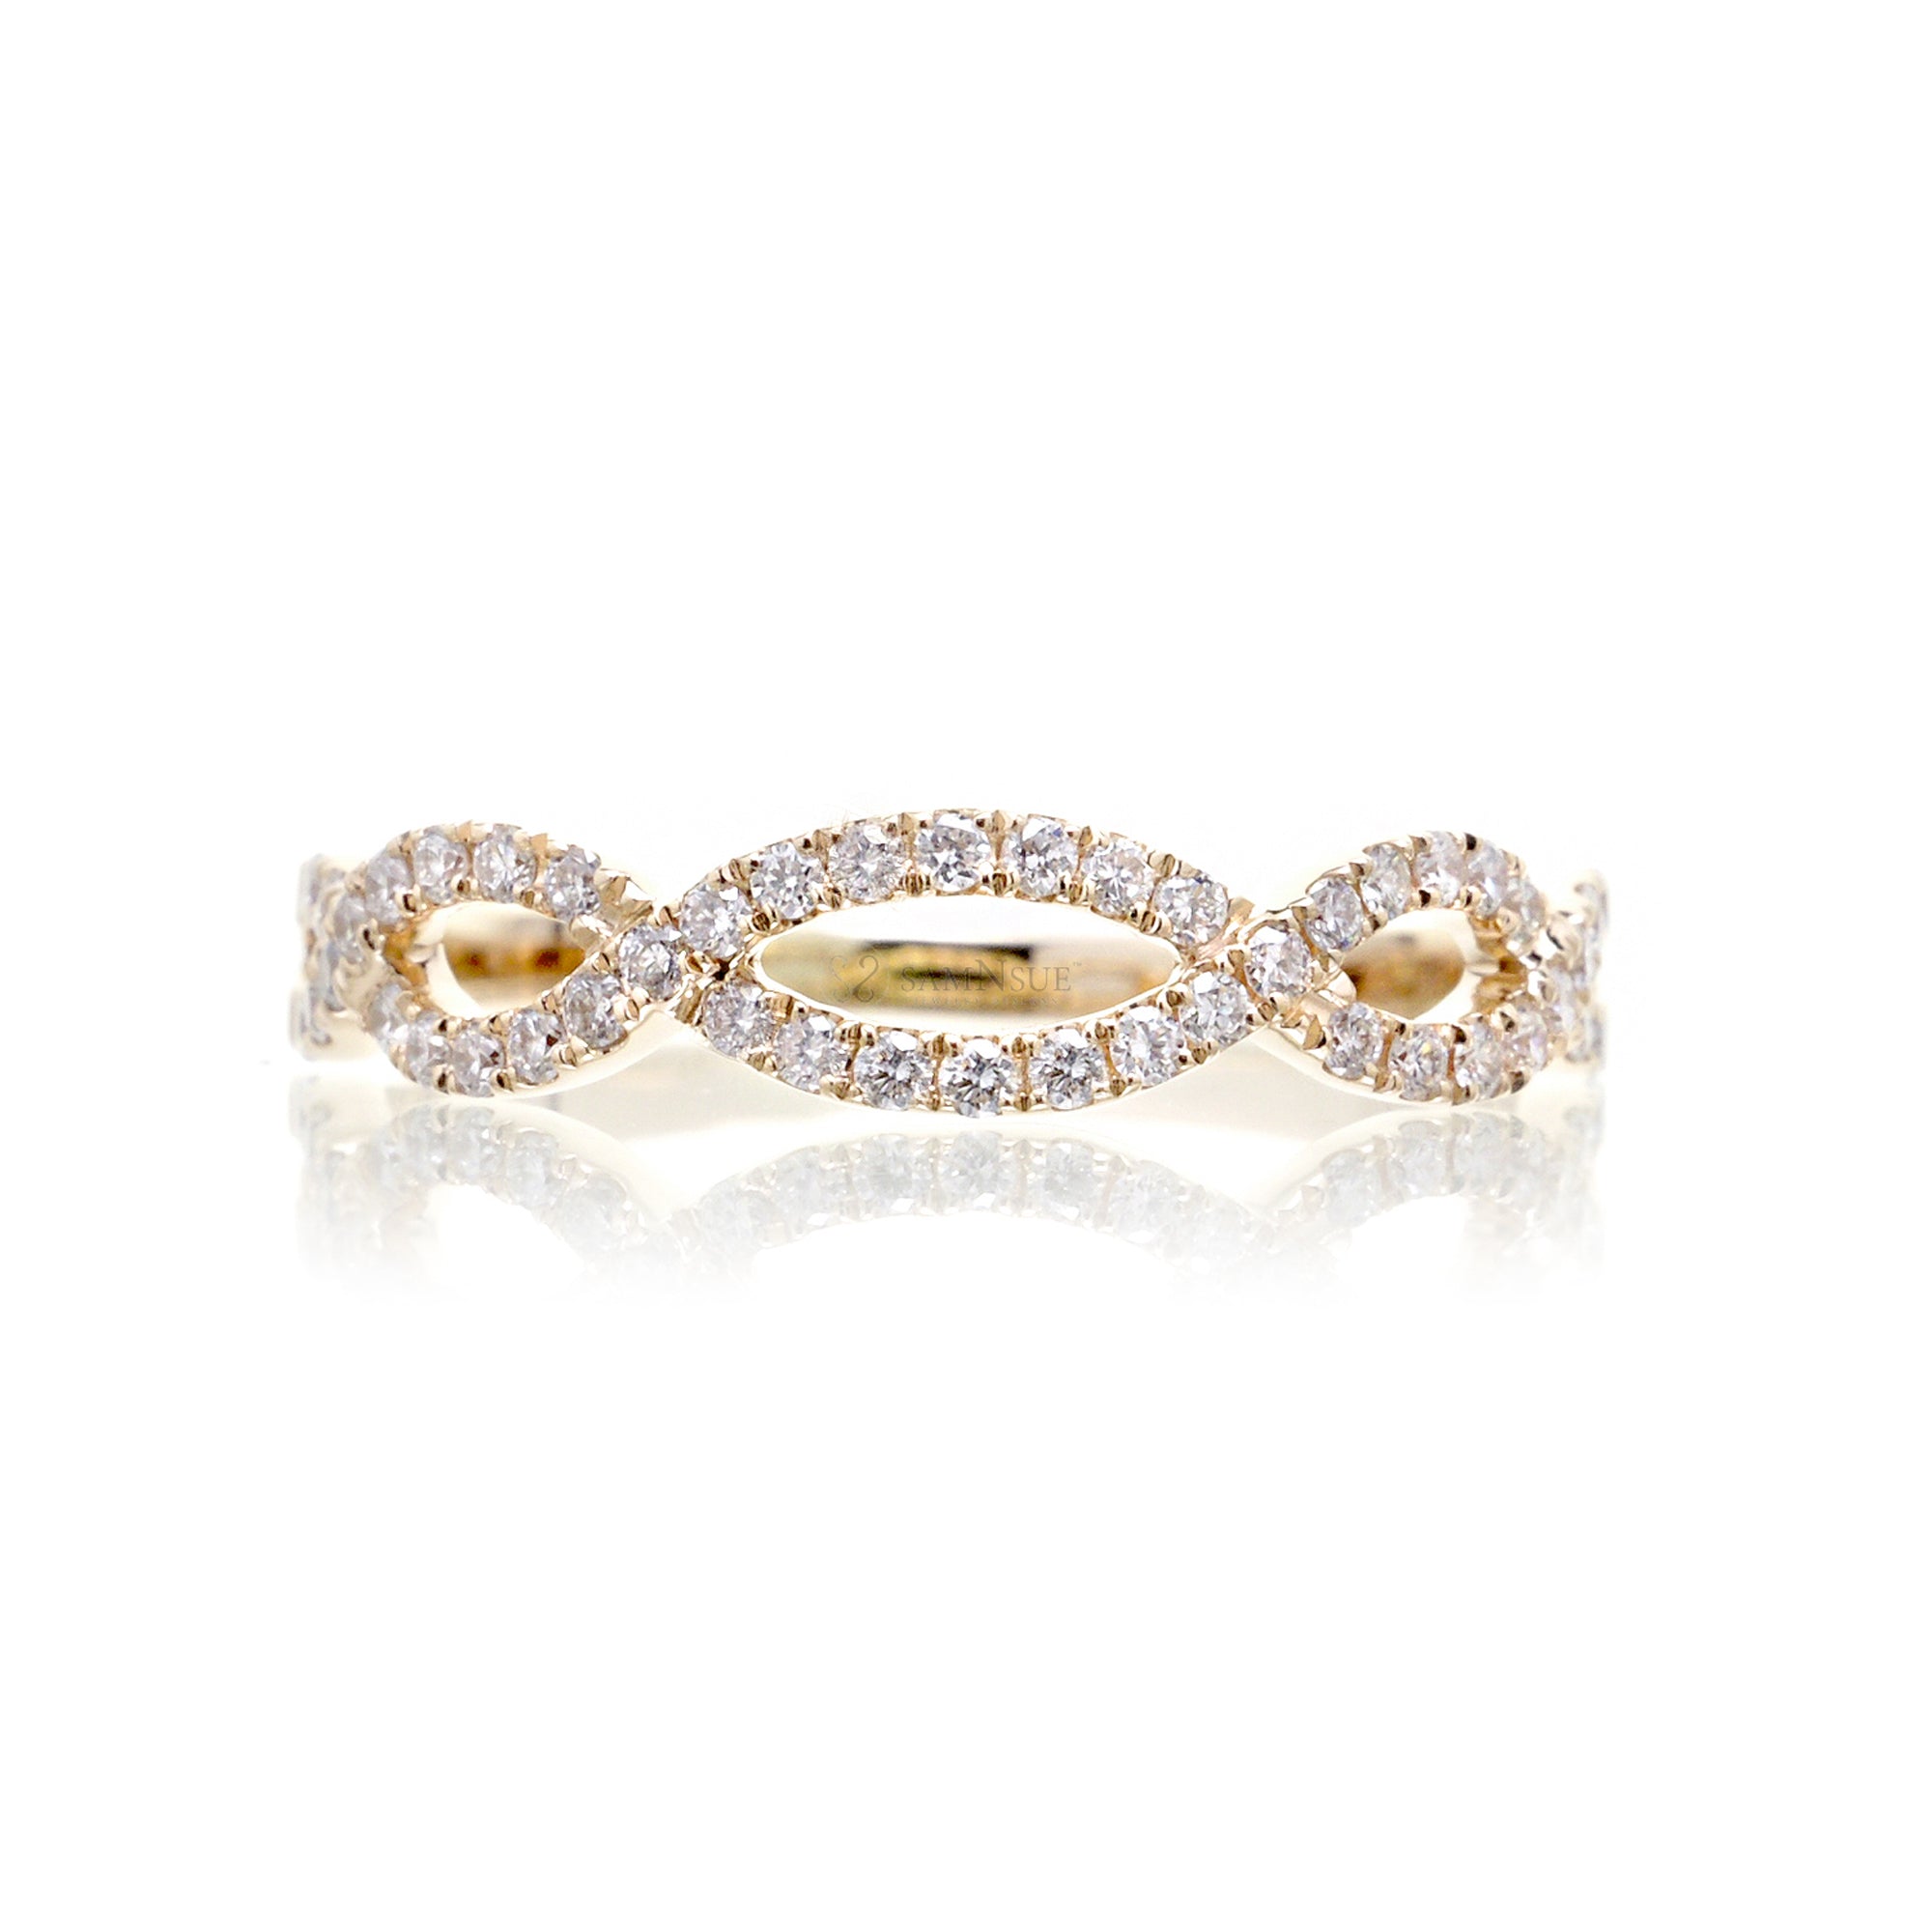 Twisted infinity diamond wedding band the Rosy yellow gold